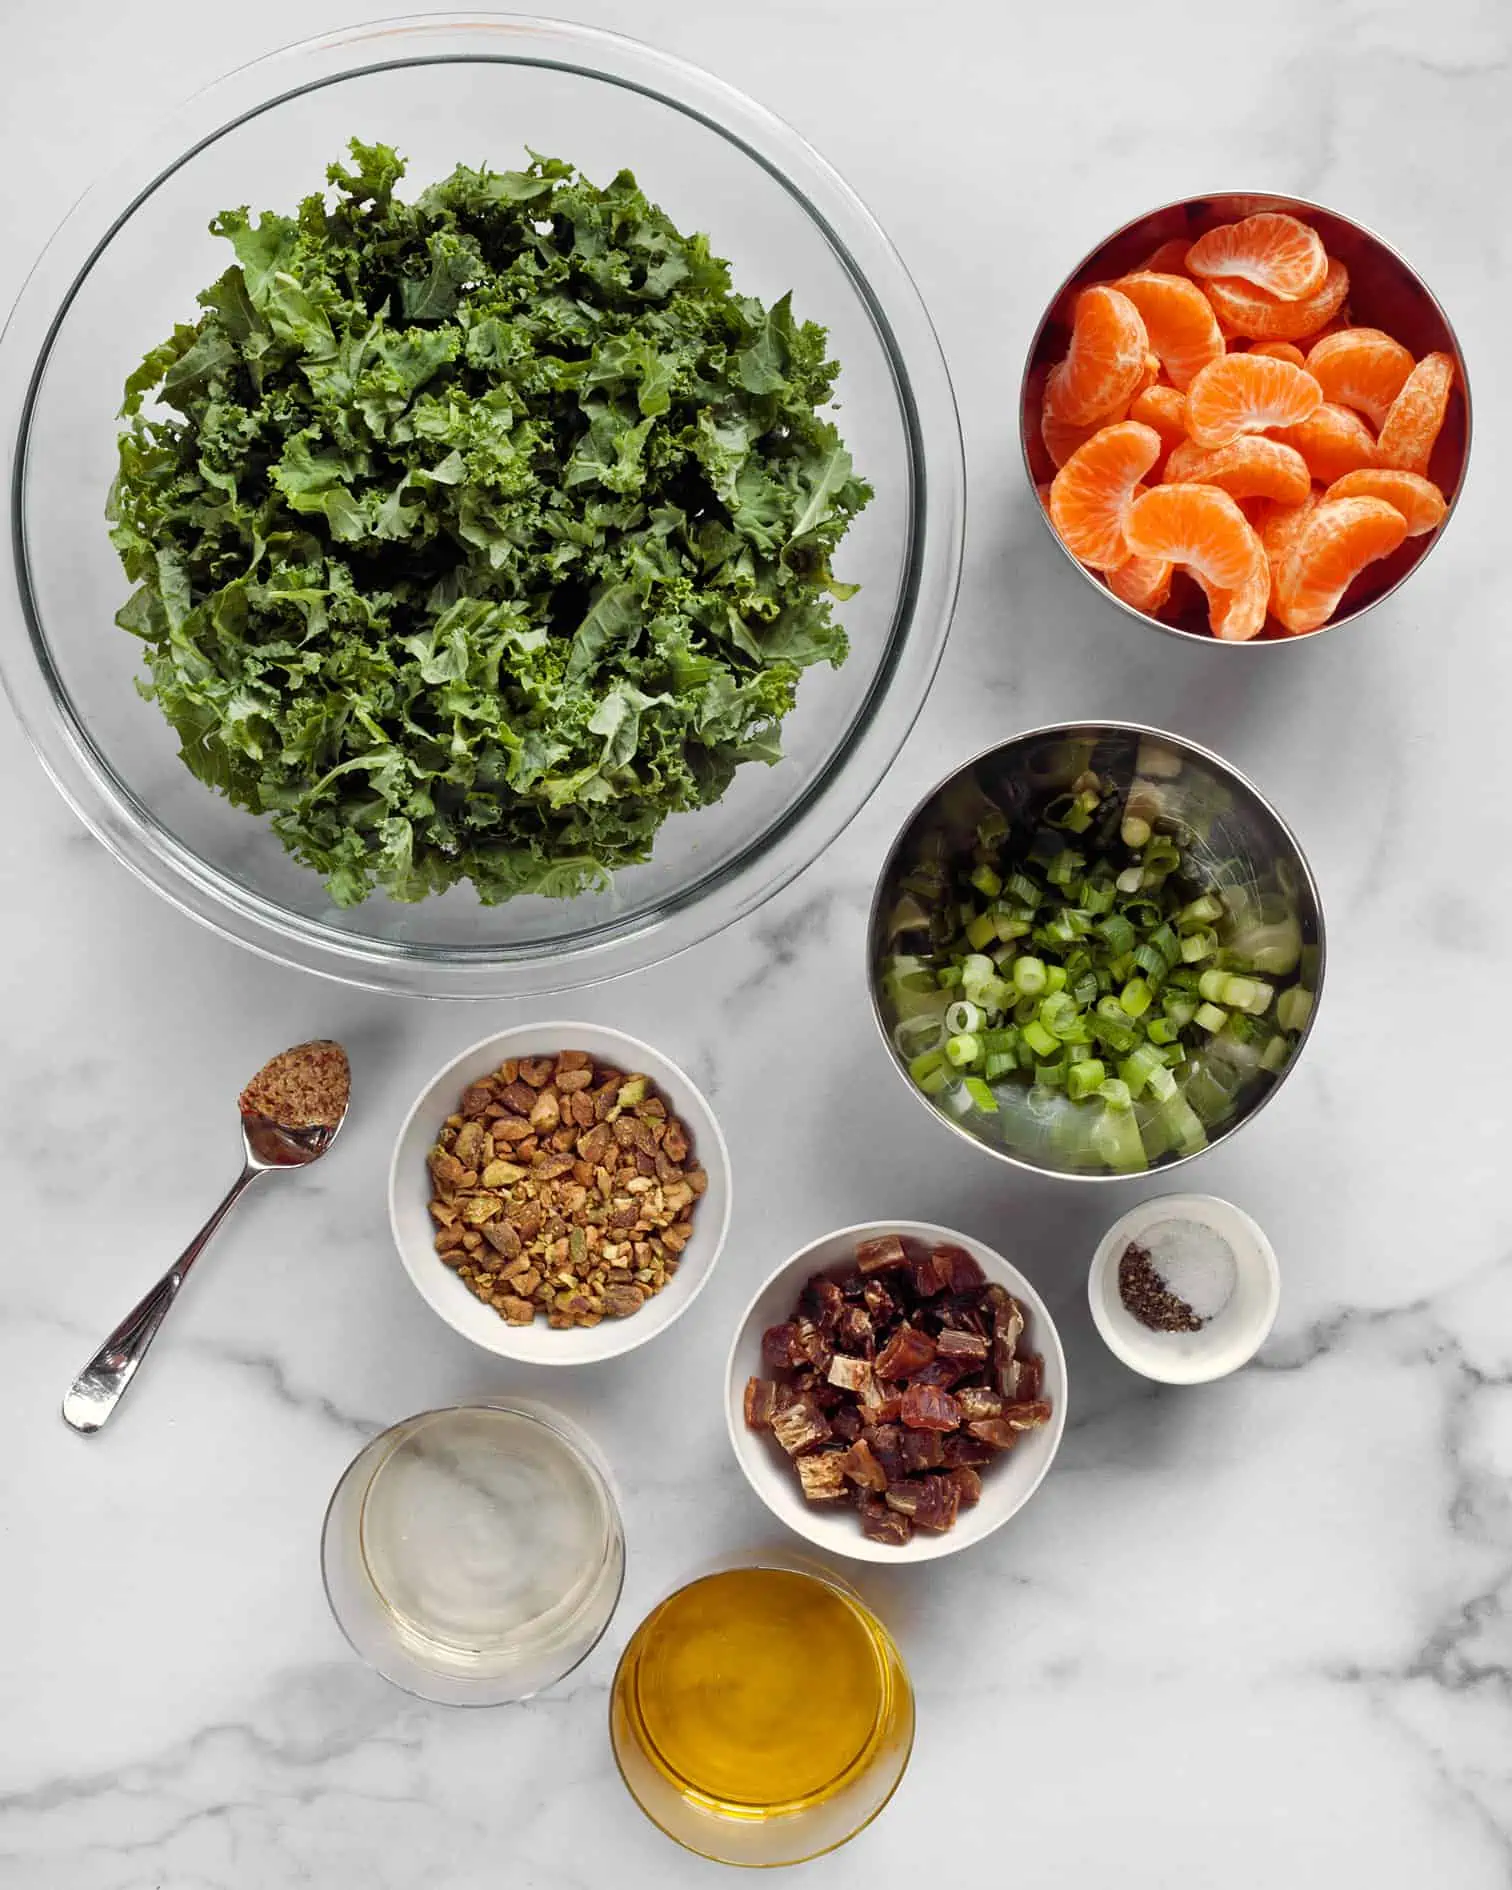 Ingredients for kale salad including mandarin oranges, dates, pistachios, and scallions